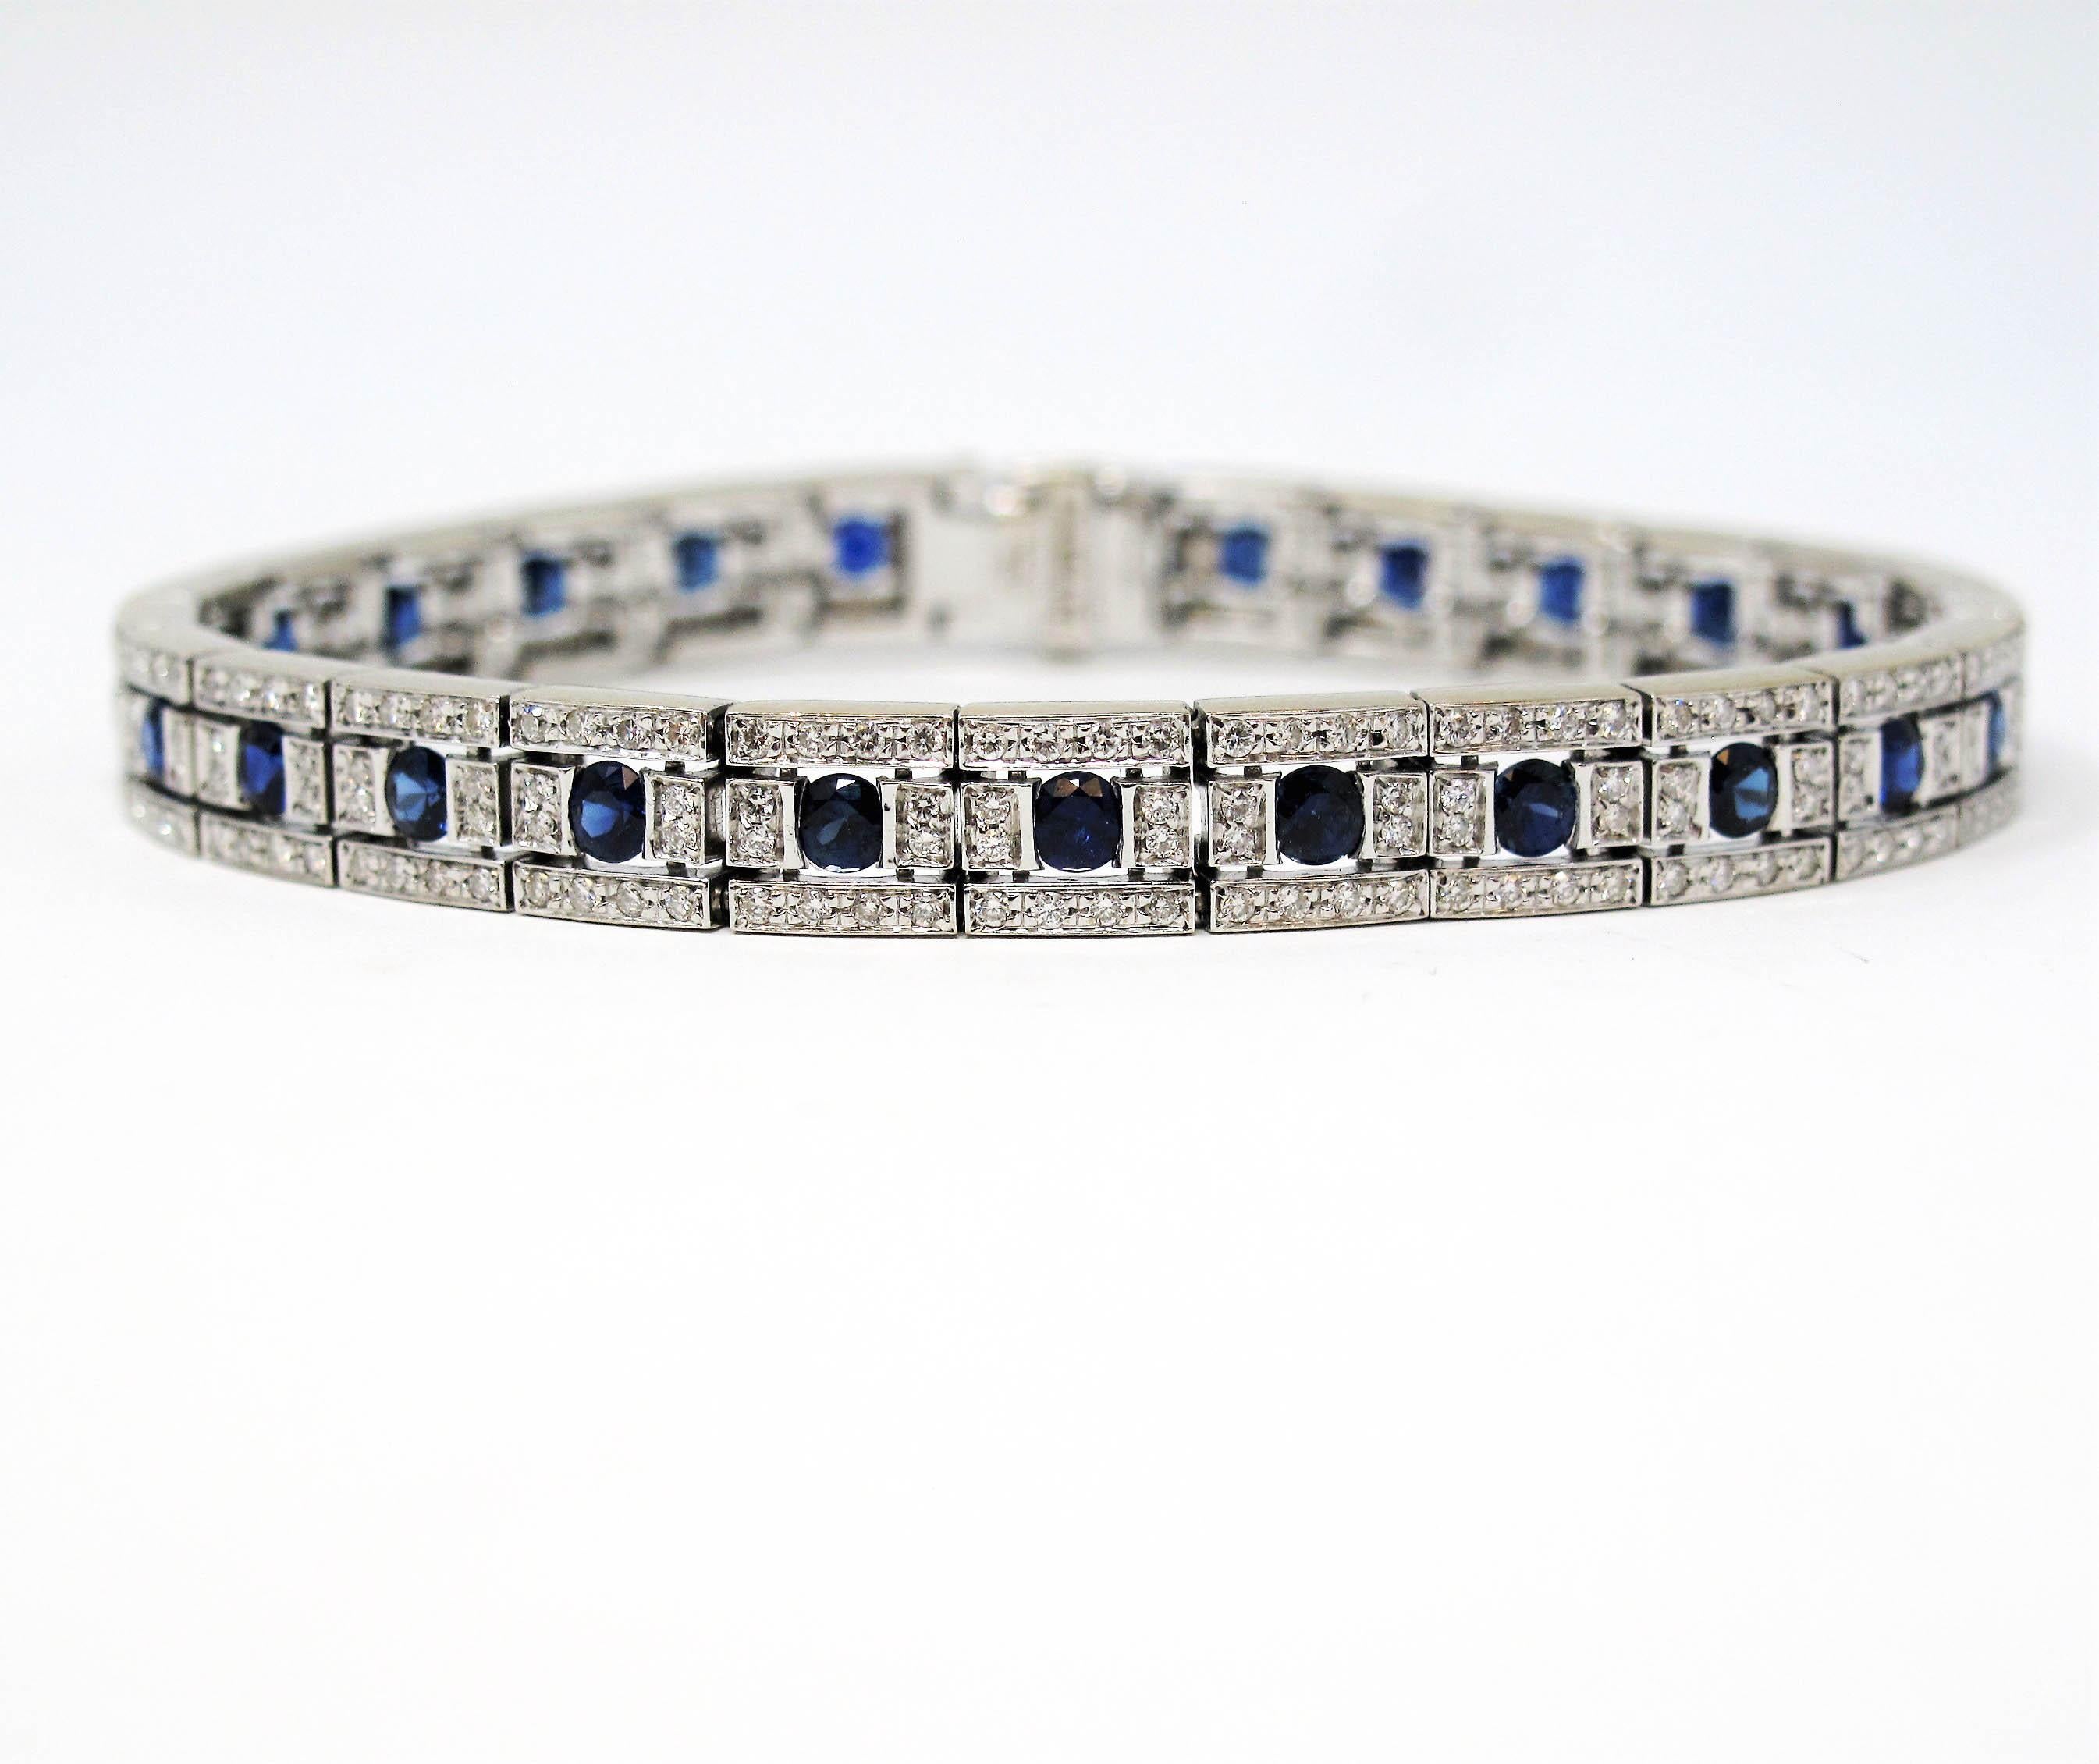 This gorgeous tennis bracelet features 26 round cut sapphire stones set along the center of the bracelet. The sapphires are a rich, deep blue color and total 3.45 carats. Bordering the edges of the bracelet, as well as in between each sapphire